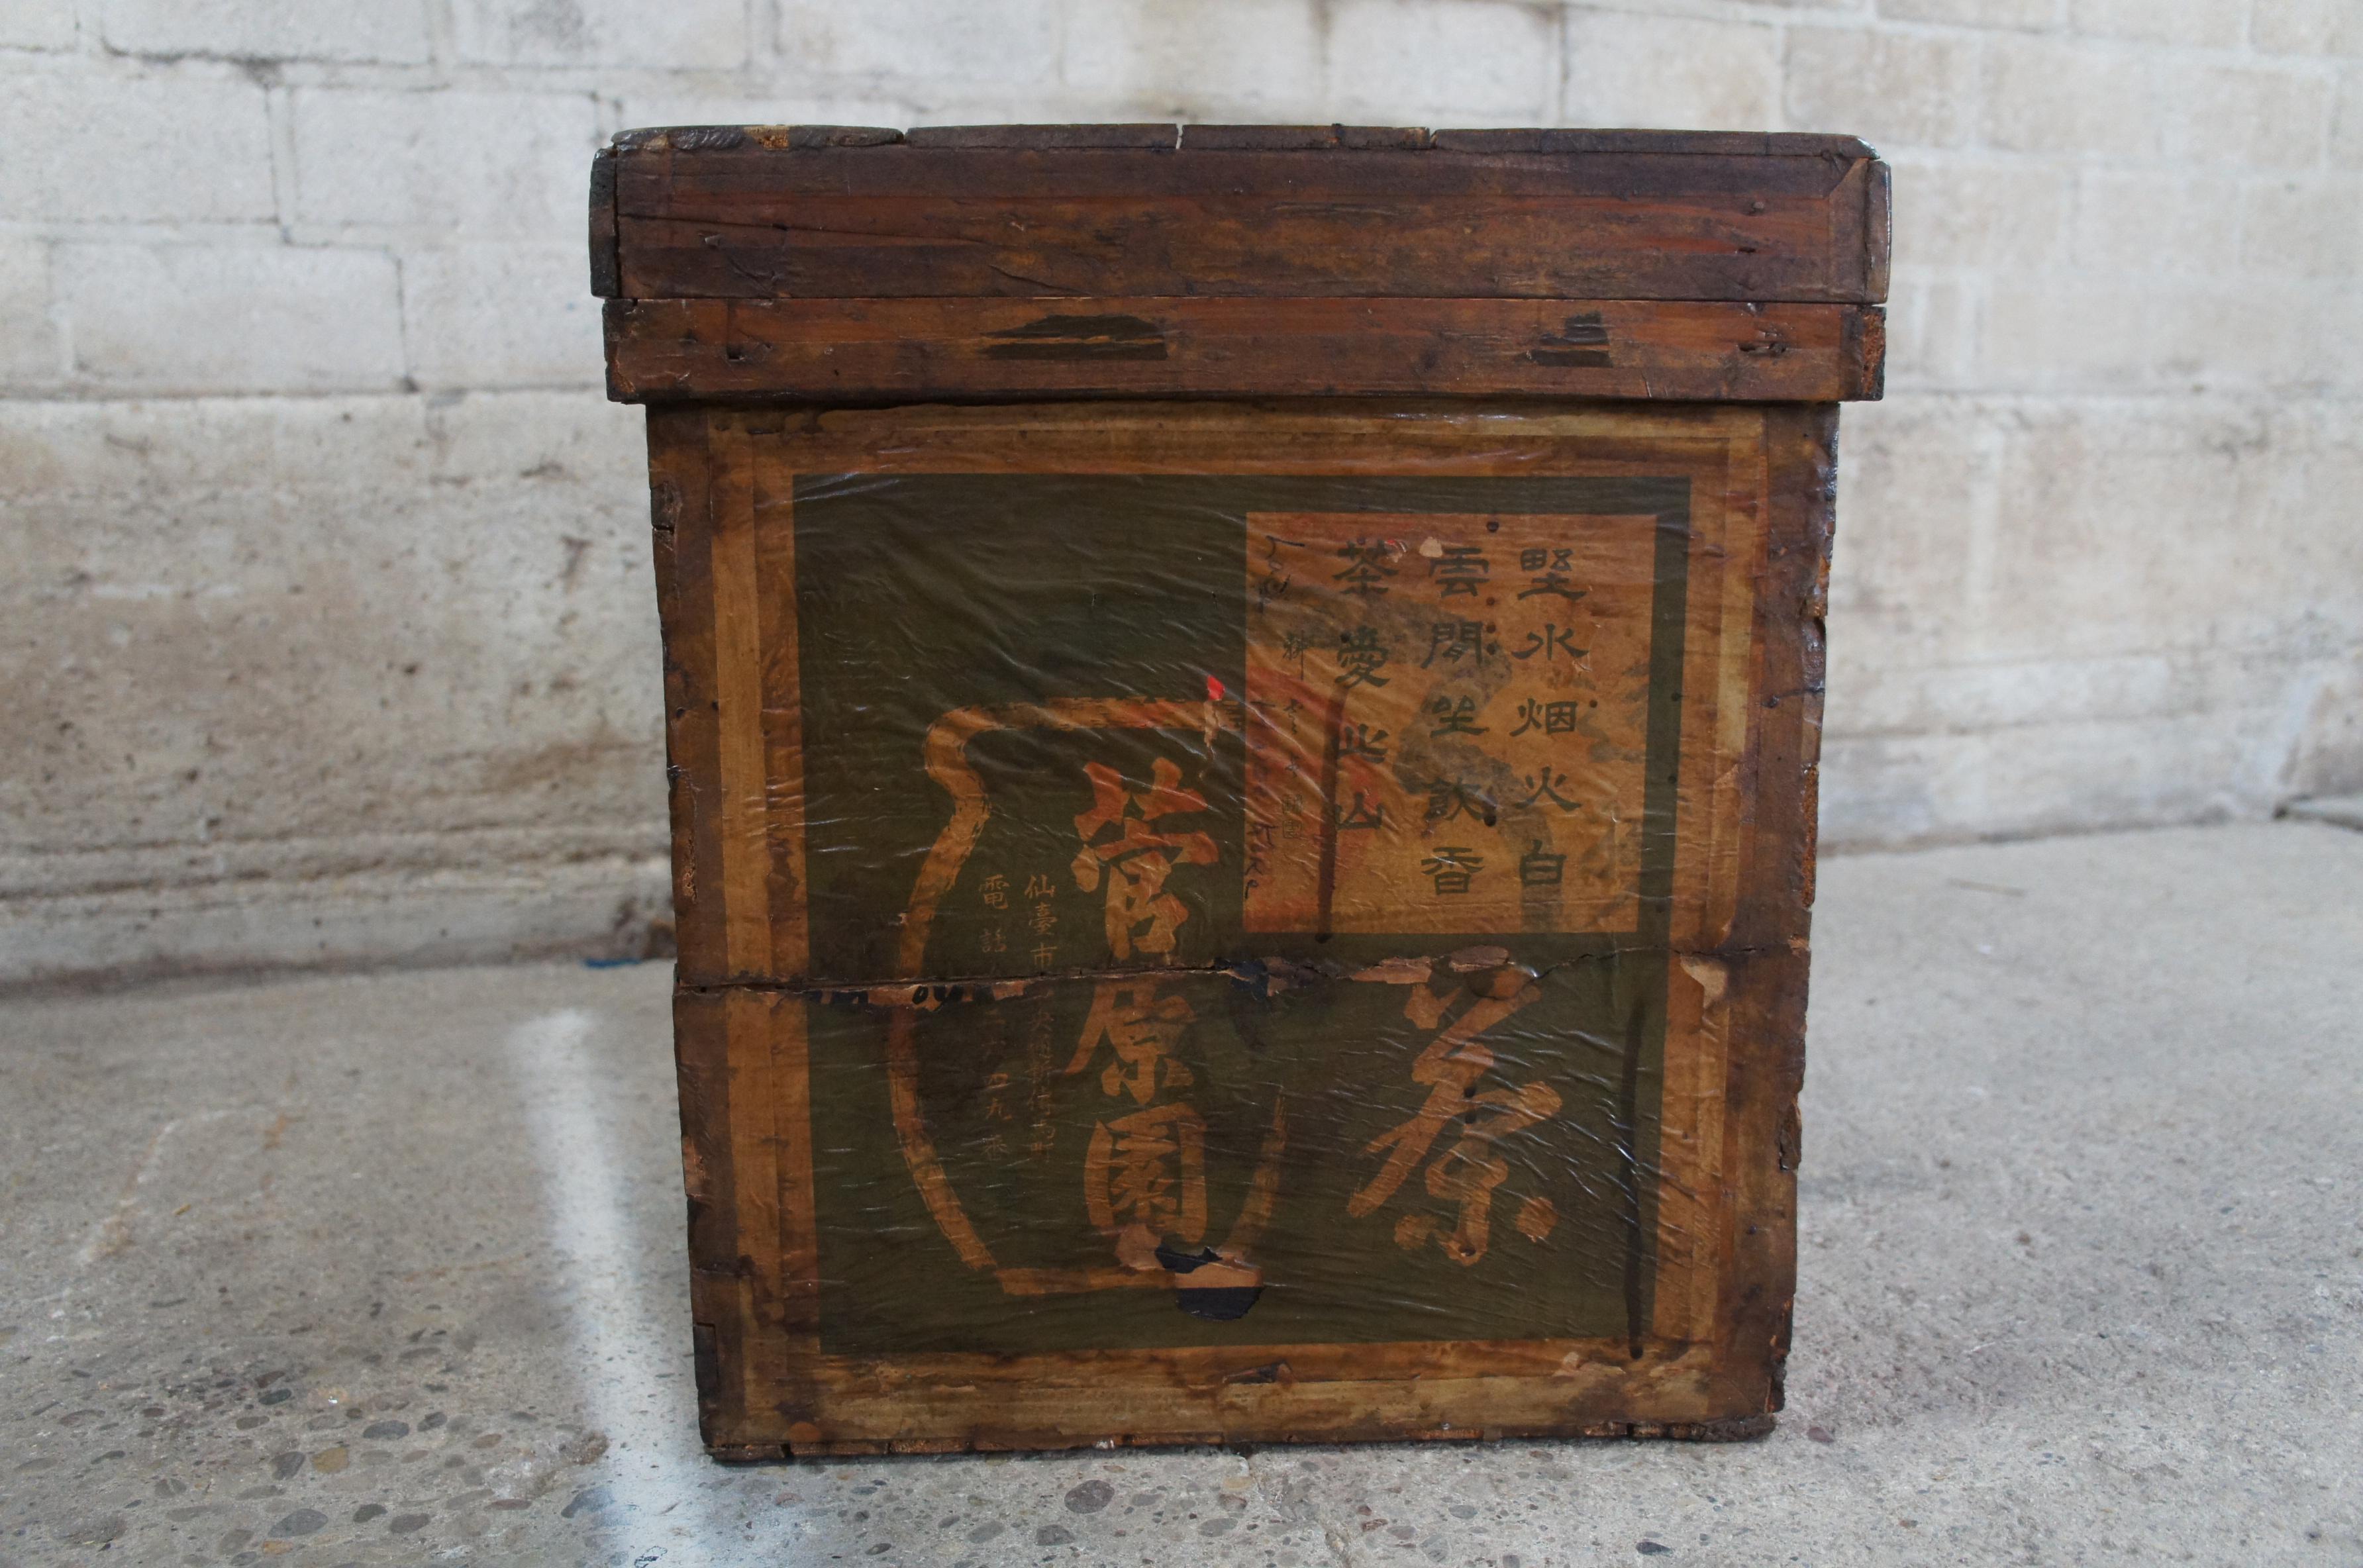 Antique Chinese Wooden Tea Shipping Box Crate Tin Lining Coffee End Table 1